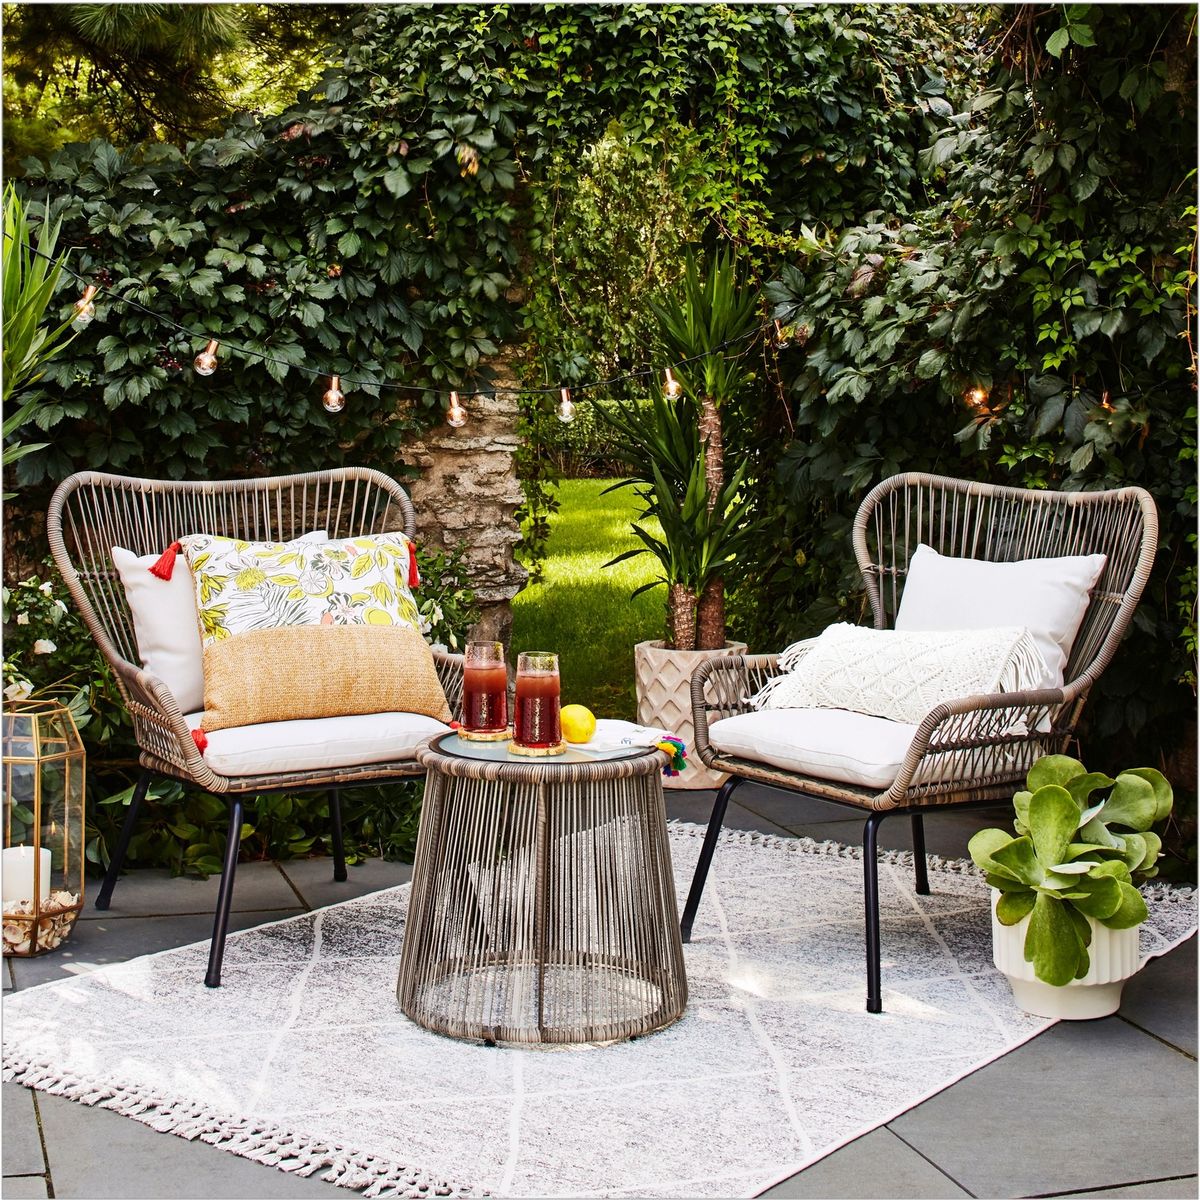 These Outdoor Best-Sellers are the Perfect Picks for the Patio